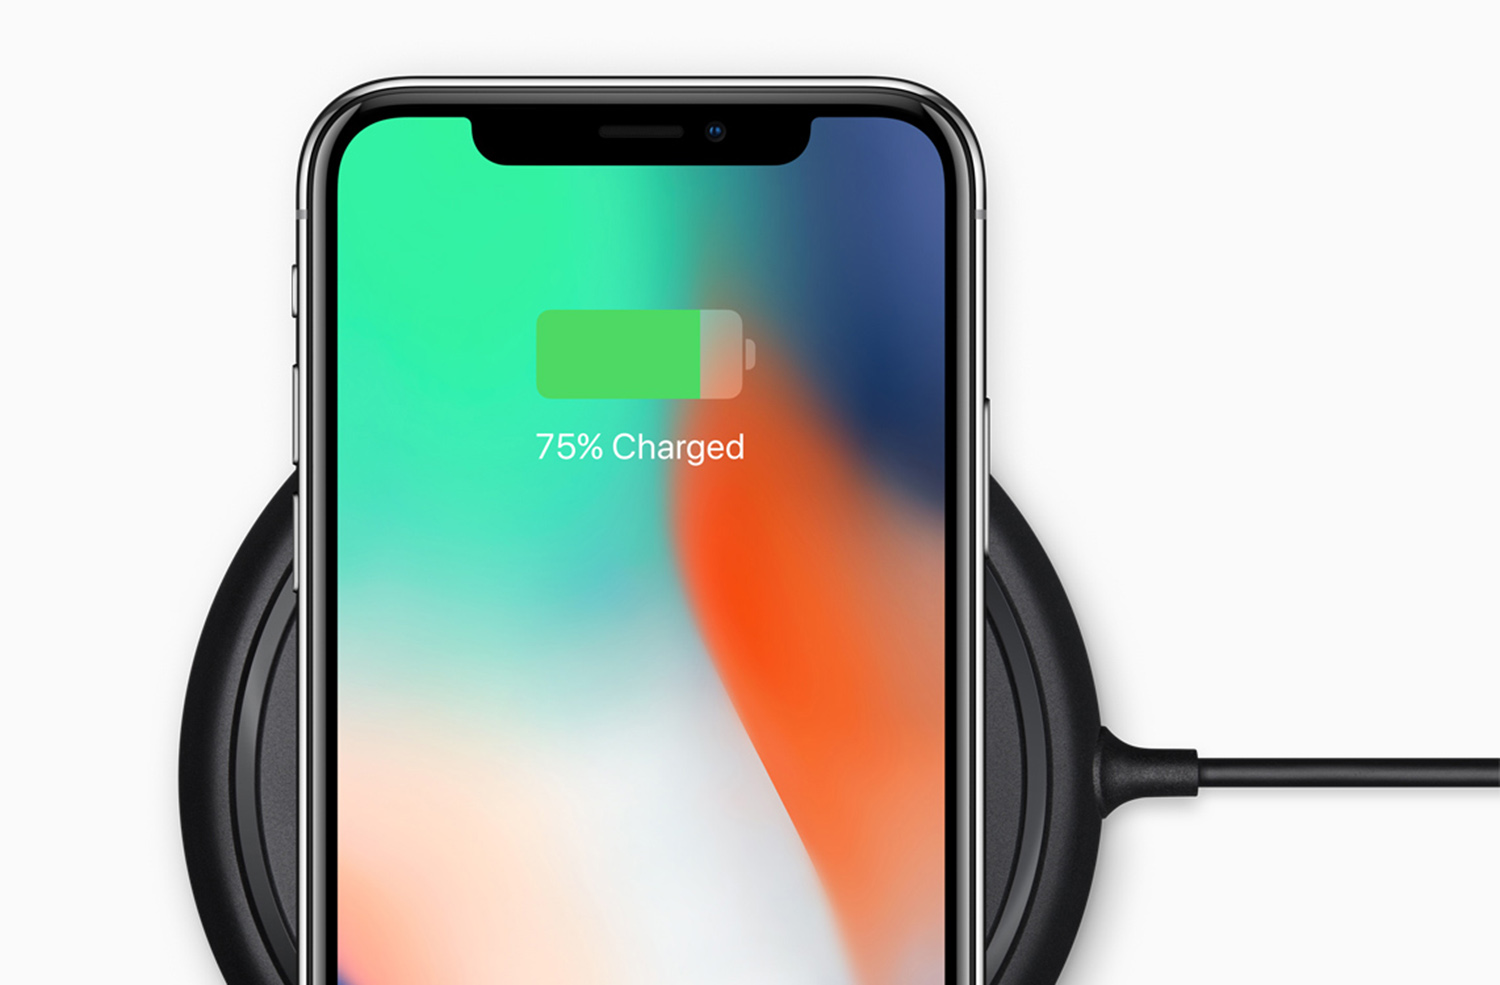 Wireless Charging Activation: Enabling Wireless Charging On IPhone 11